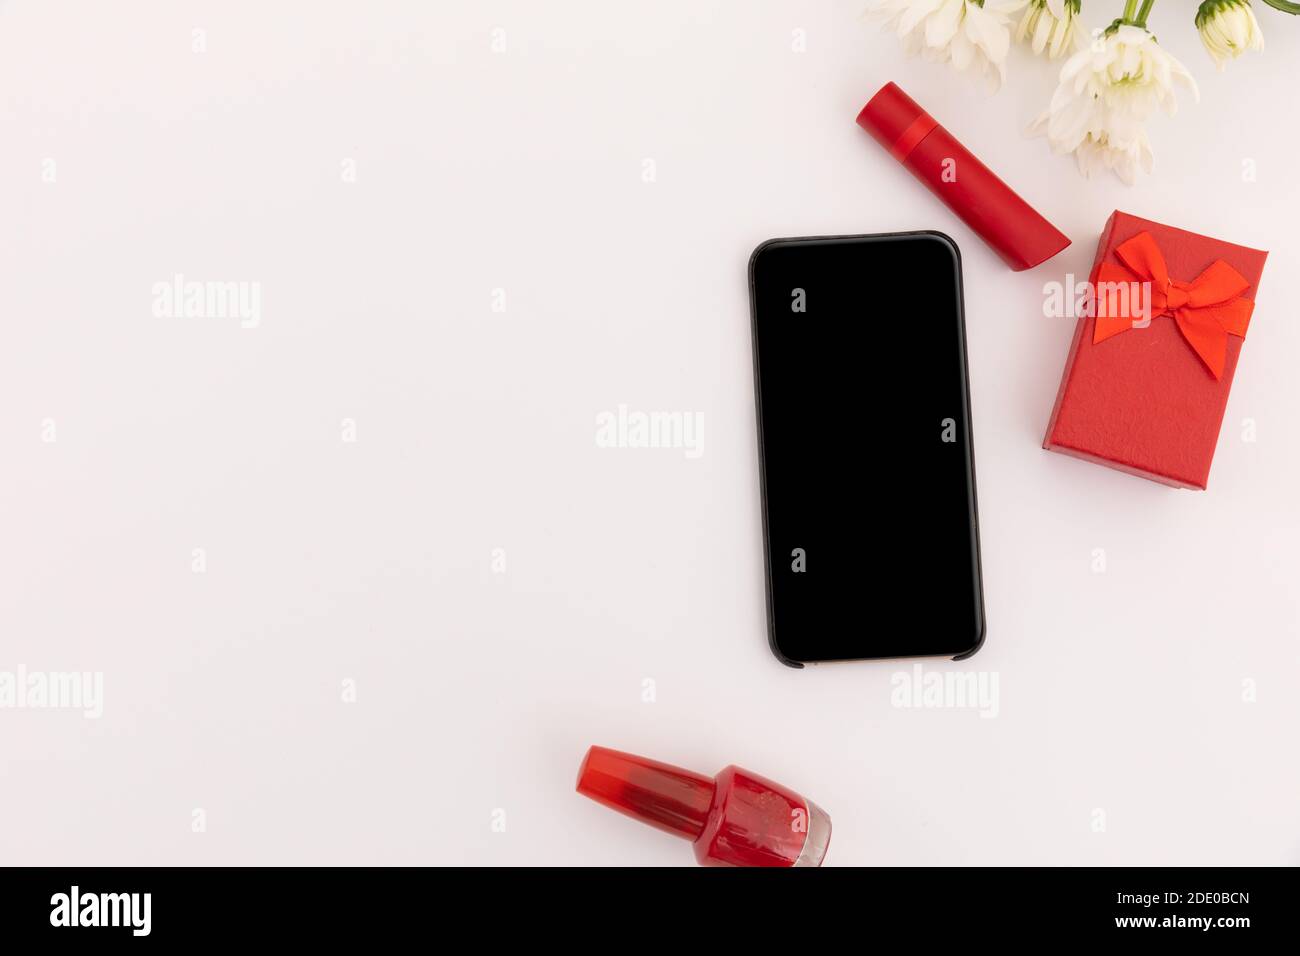 Smartphone, red lipstick, nail varnish, present and flowers on white background Stock Photo